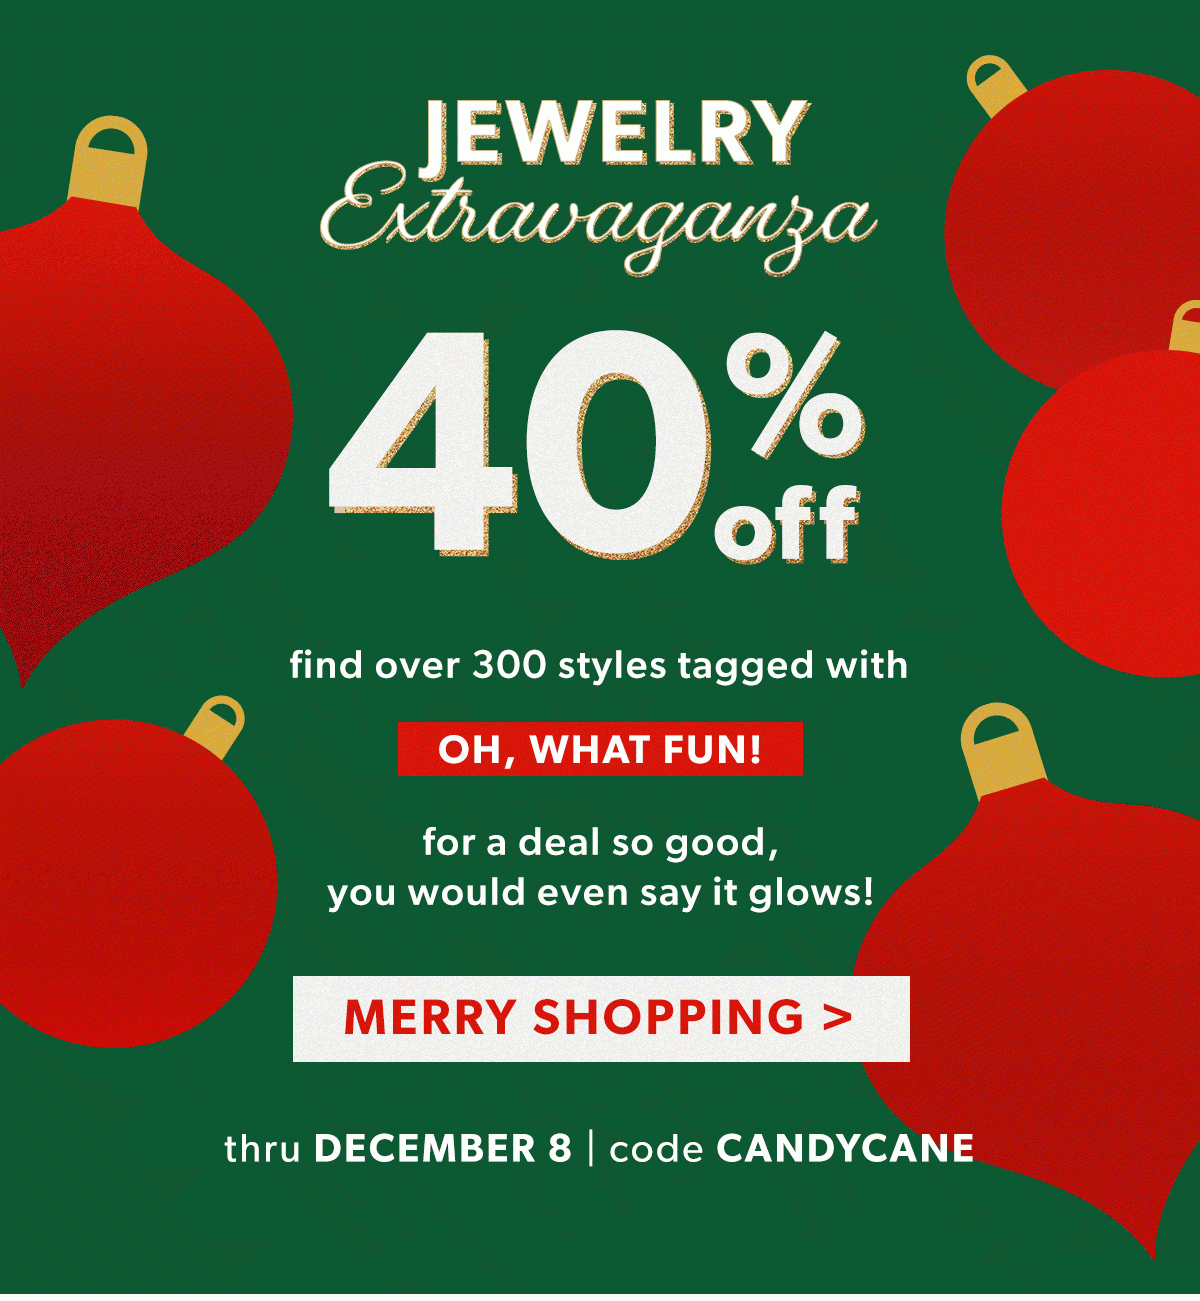 Jewelry Extravaganza. 40% Off. Merry Shopping